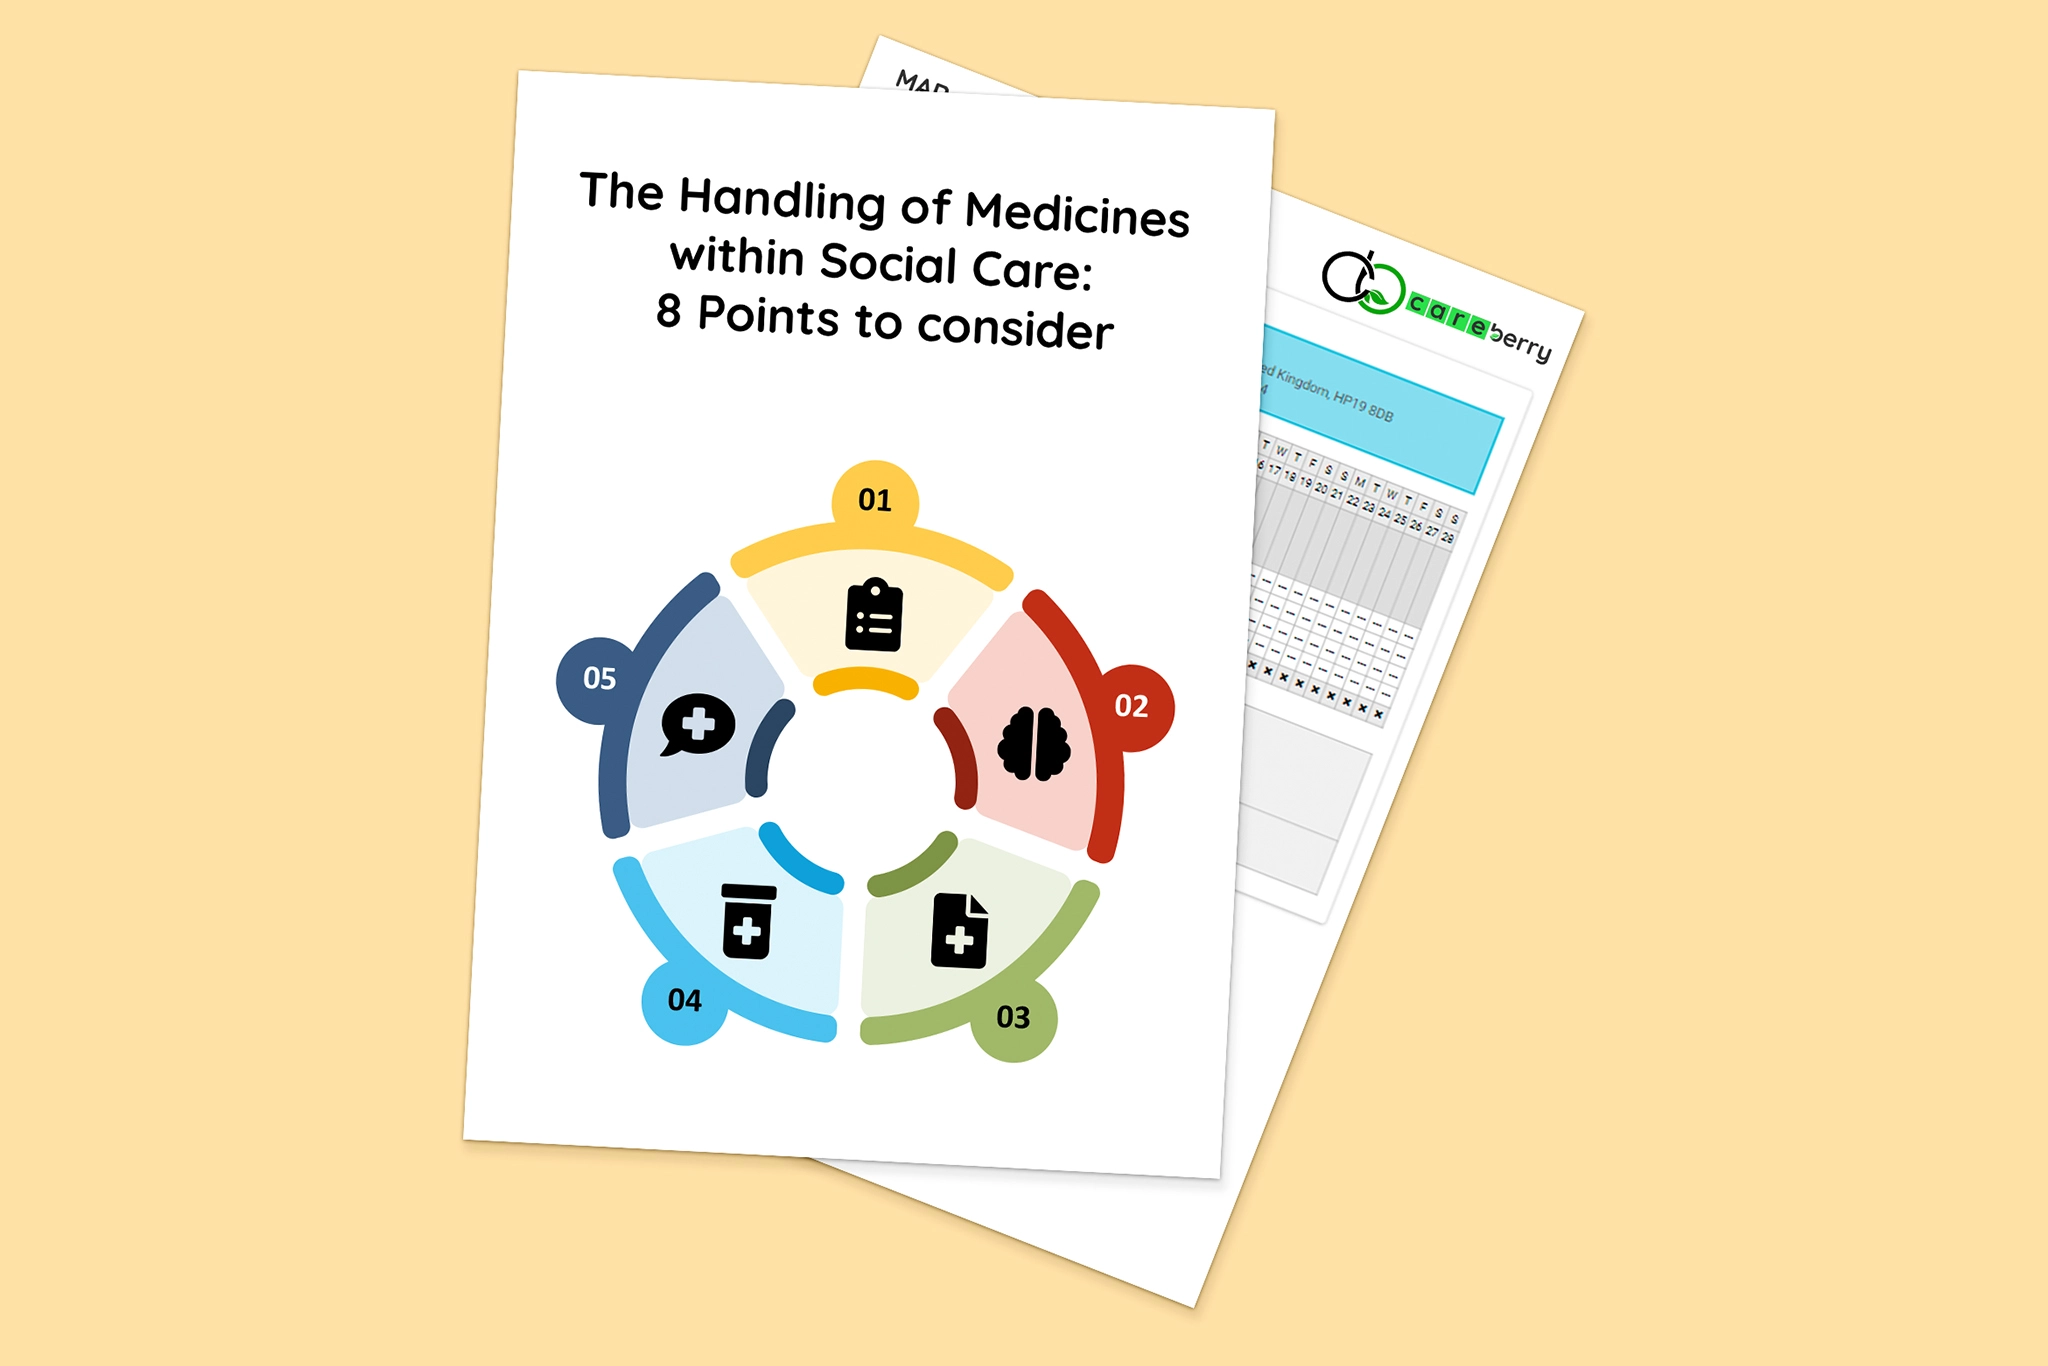 The Handling of Medicines in Social Care: 8 Points to consider